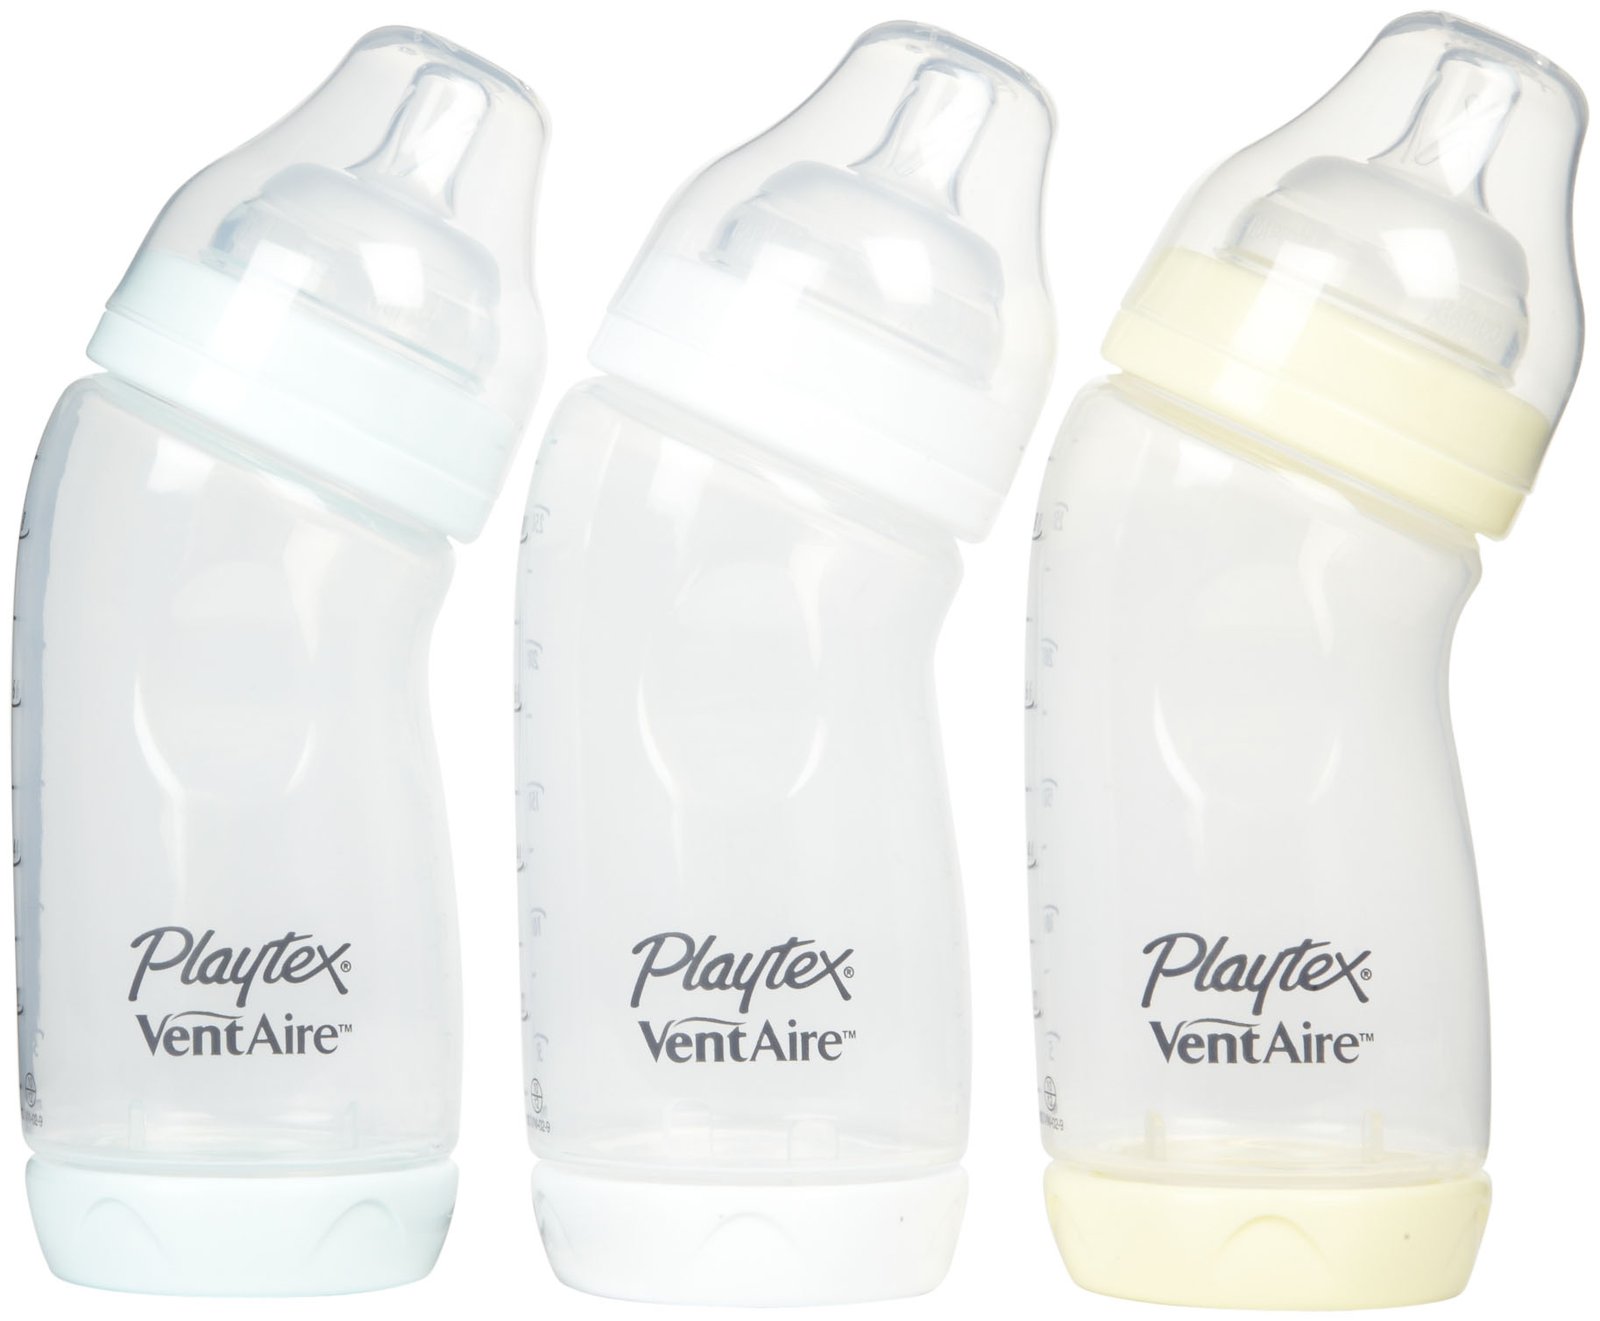 Playtex VentAire Advanced Wide Baby Bottles